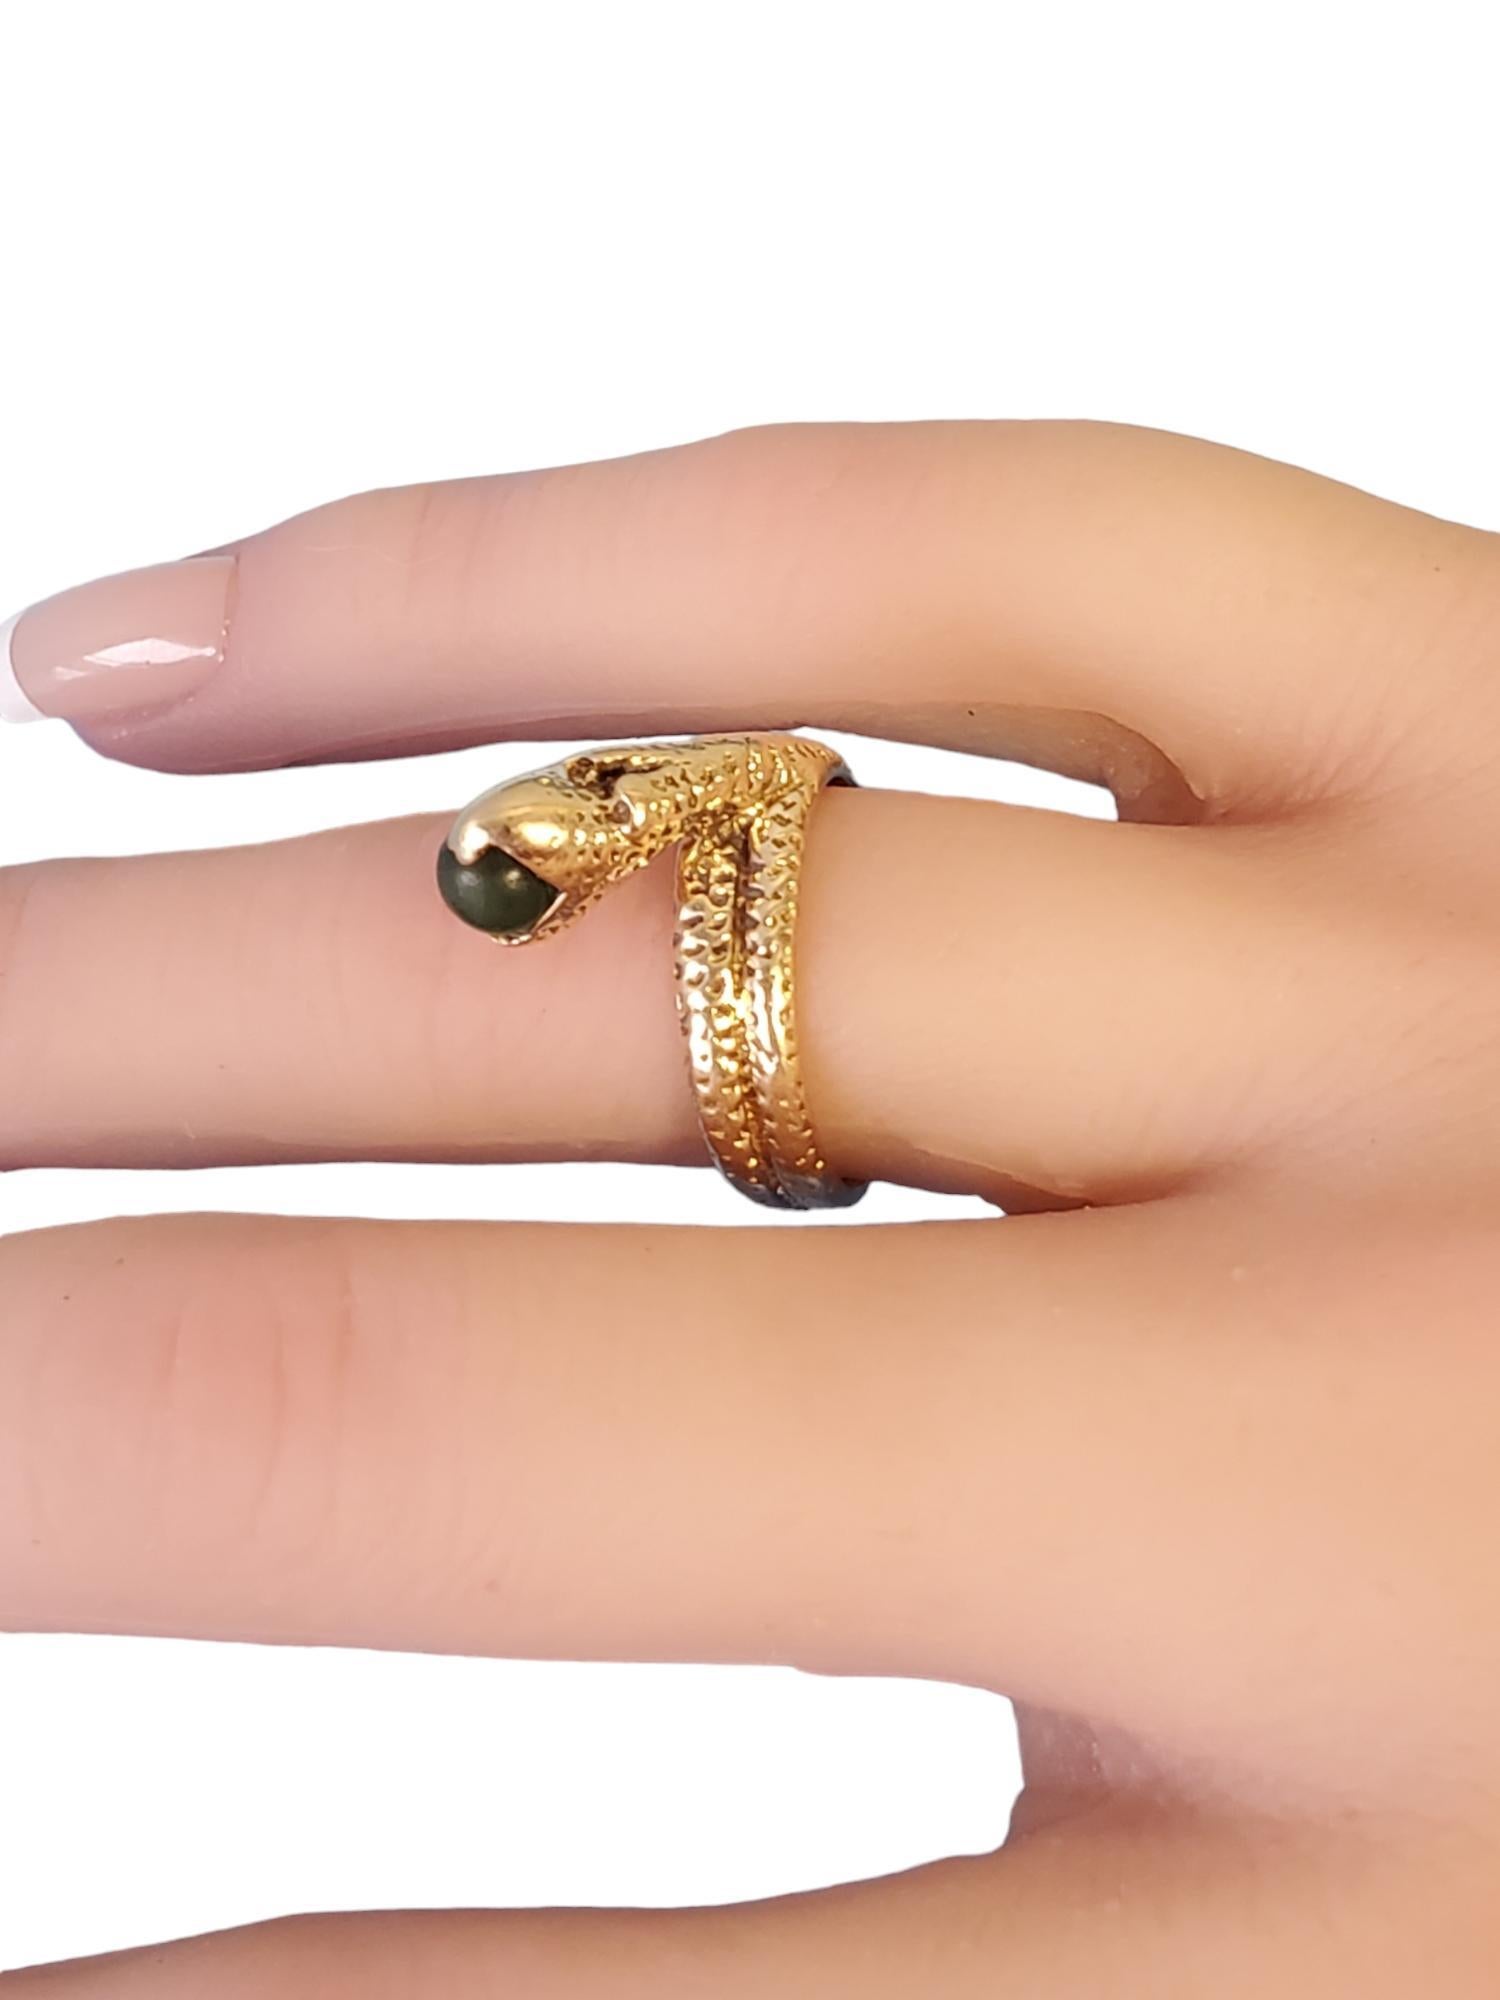 Vintage Old Snake Ring 14k Yellow Gold Signed Kimberly In Good Condition For Sale In Overland Park, KS